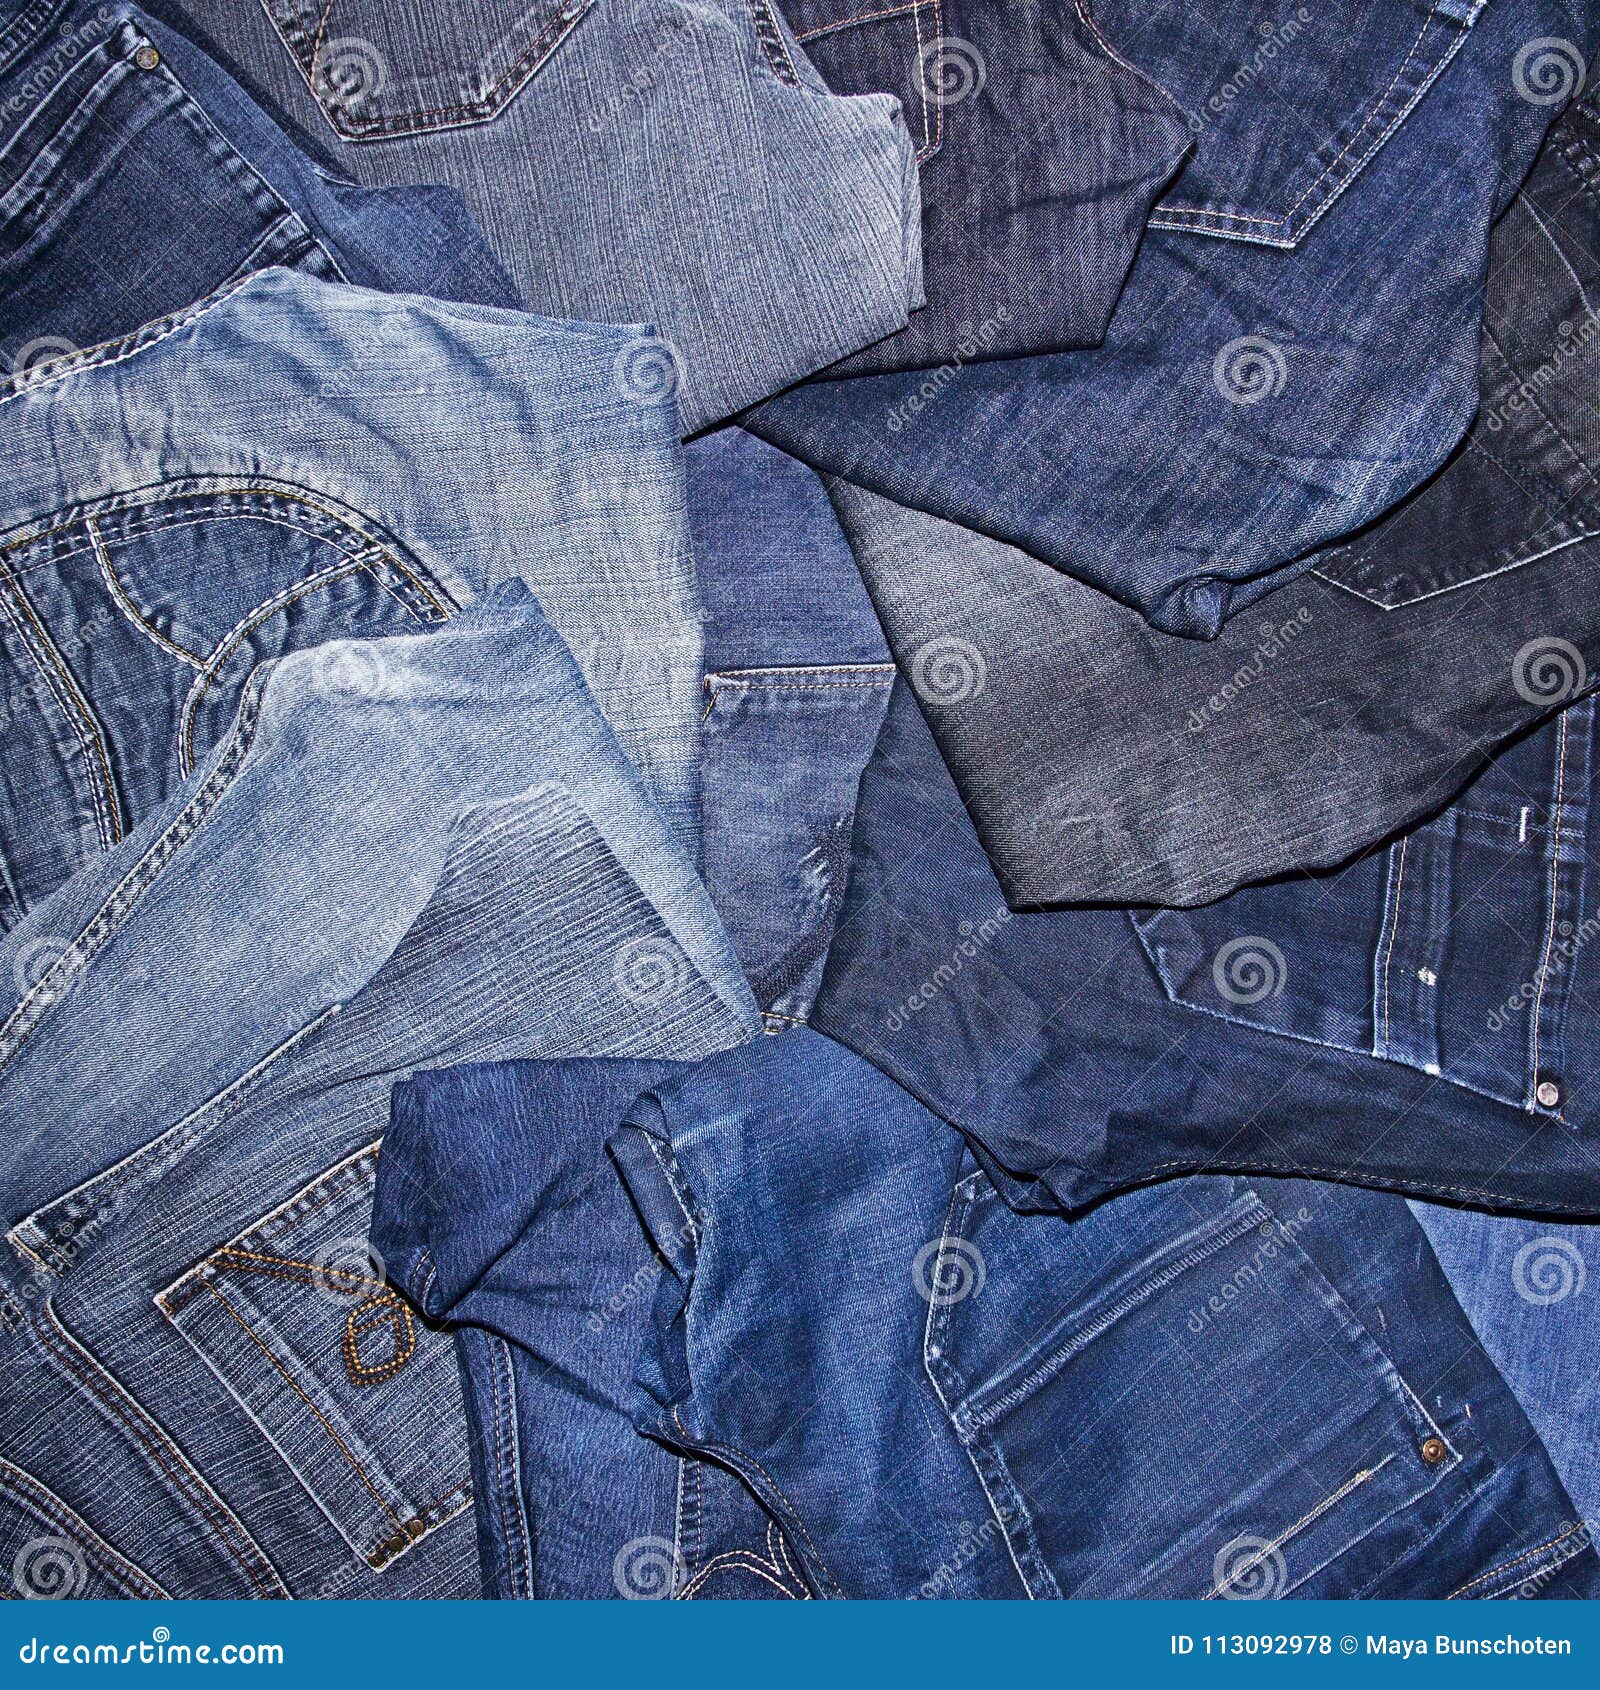 Pile of jeans stock photo. Image of apparel, attire - 113092978